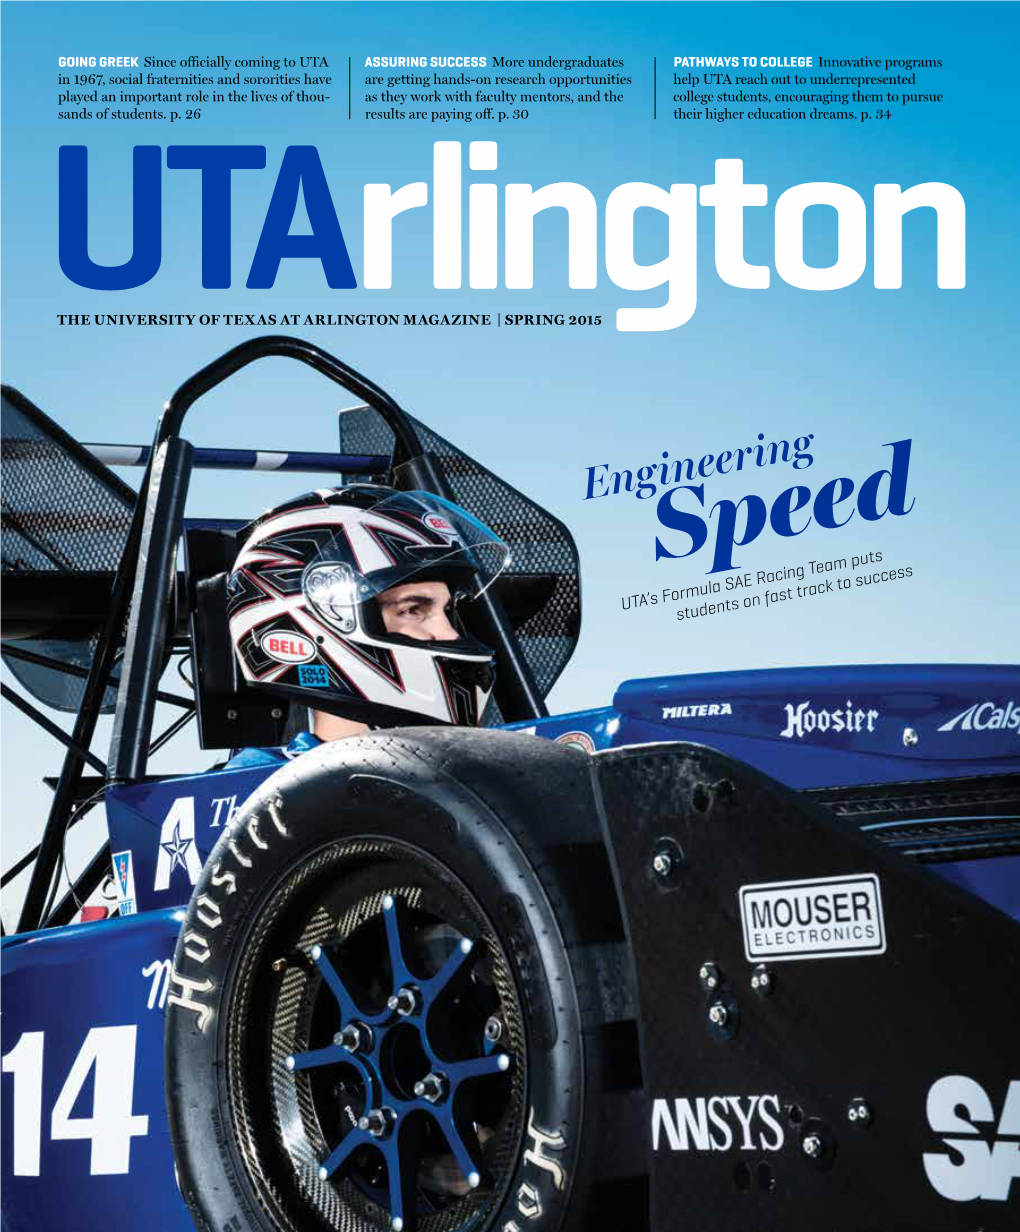 Engineeringspeed UTA’S Formula SAE Racing Team Puts Students on Fast Track to Success in a FOG Students Made Their Way Through the E.H